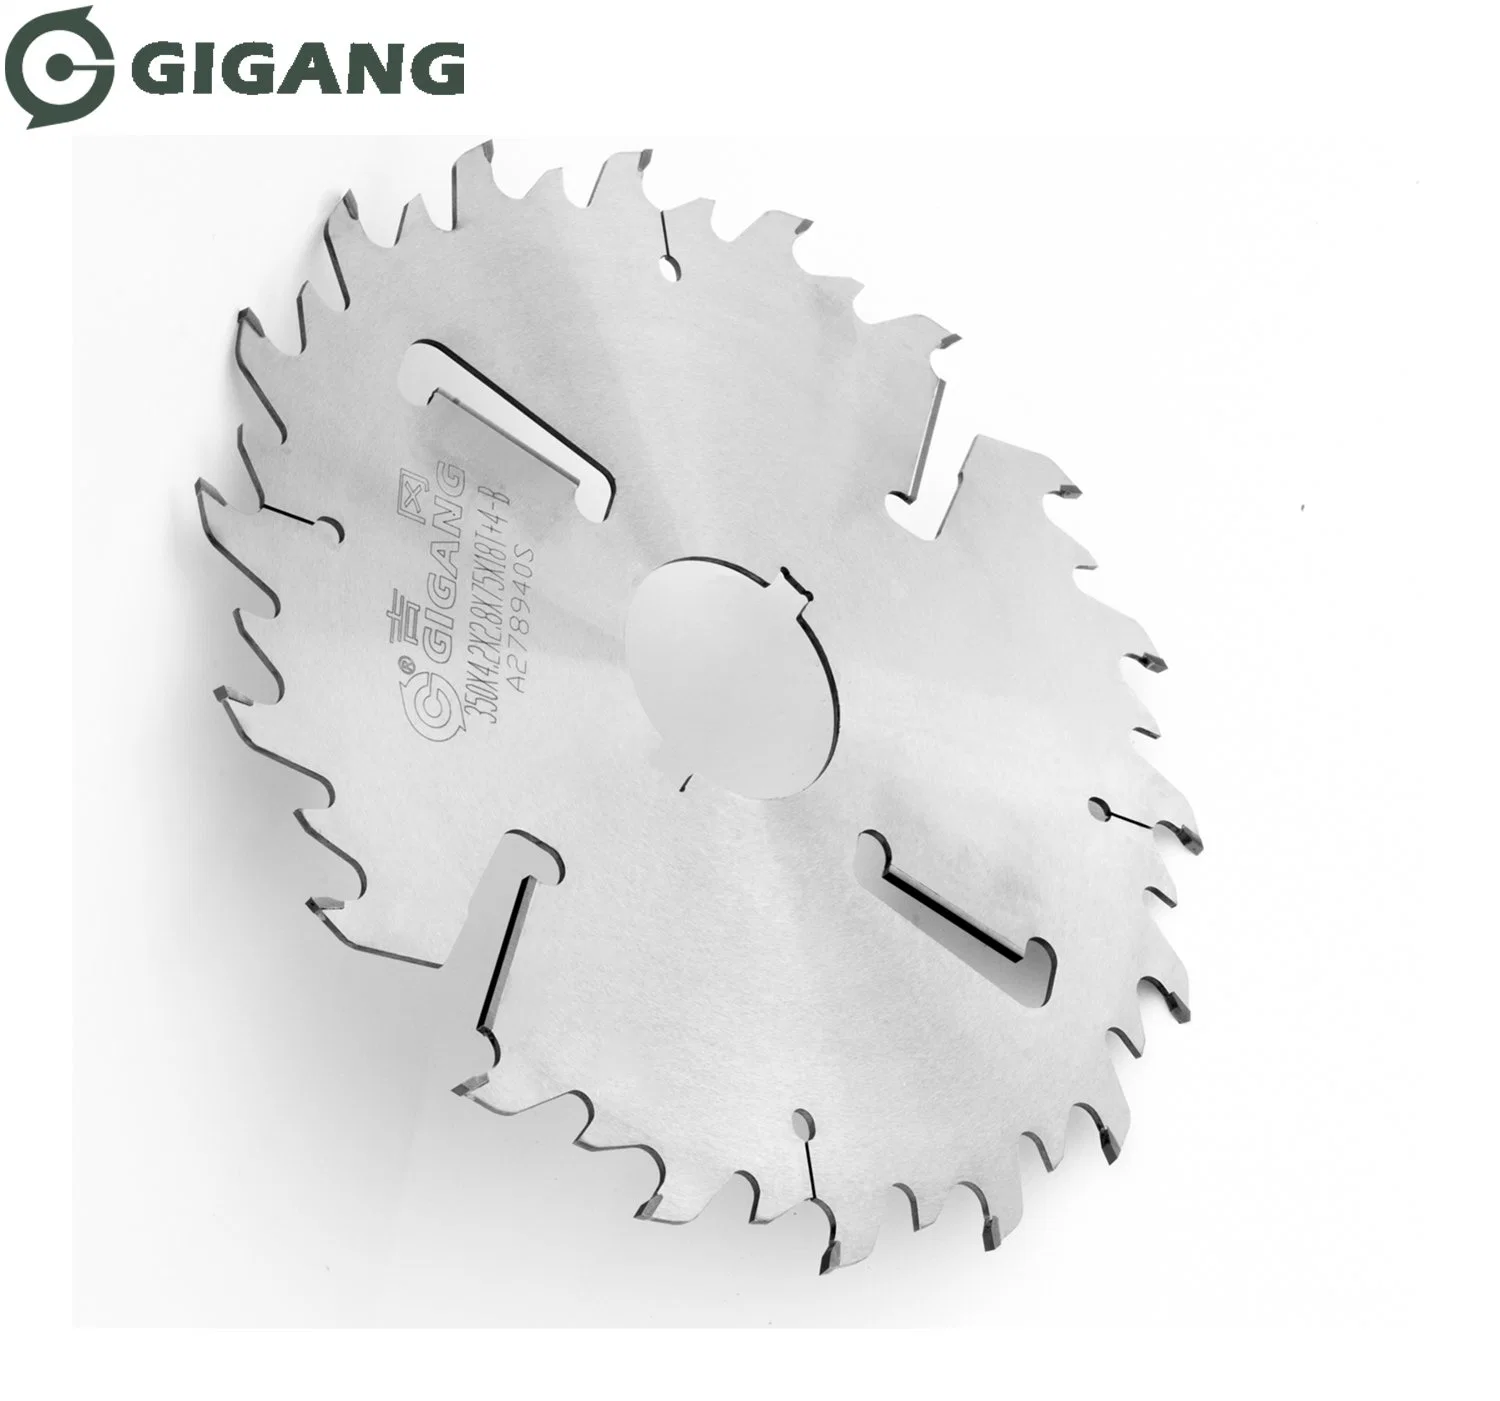 Alloy Specific 305mm Multi Ripping Carbide Tipped Circular Saw Blade